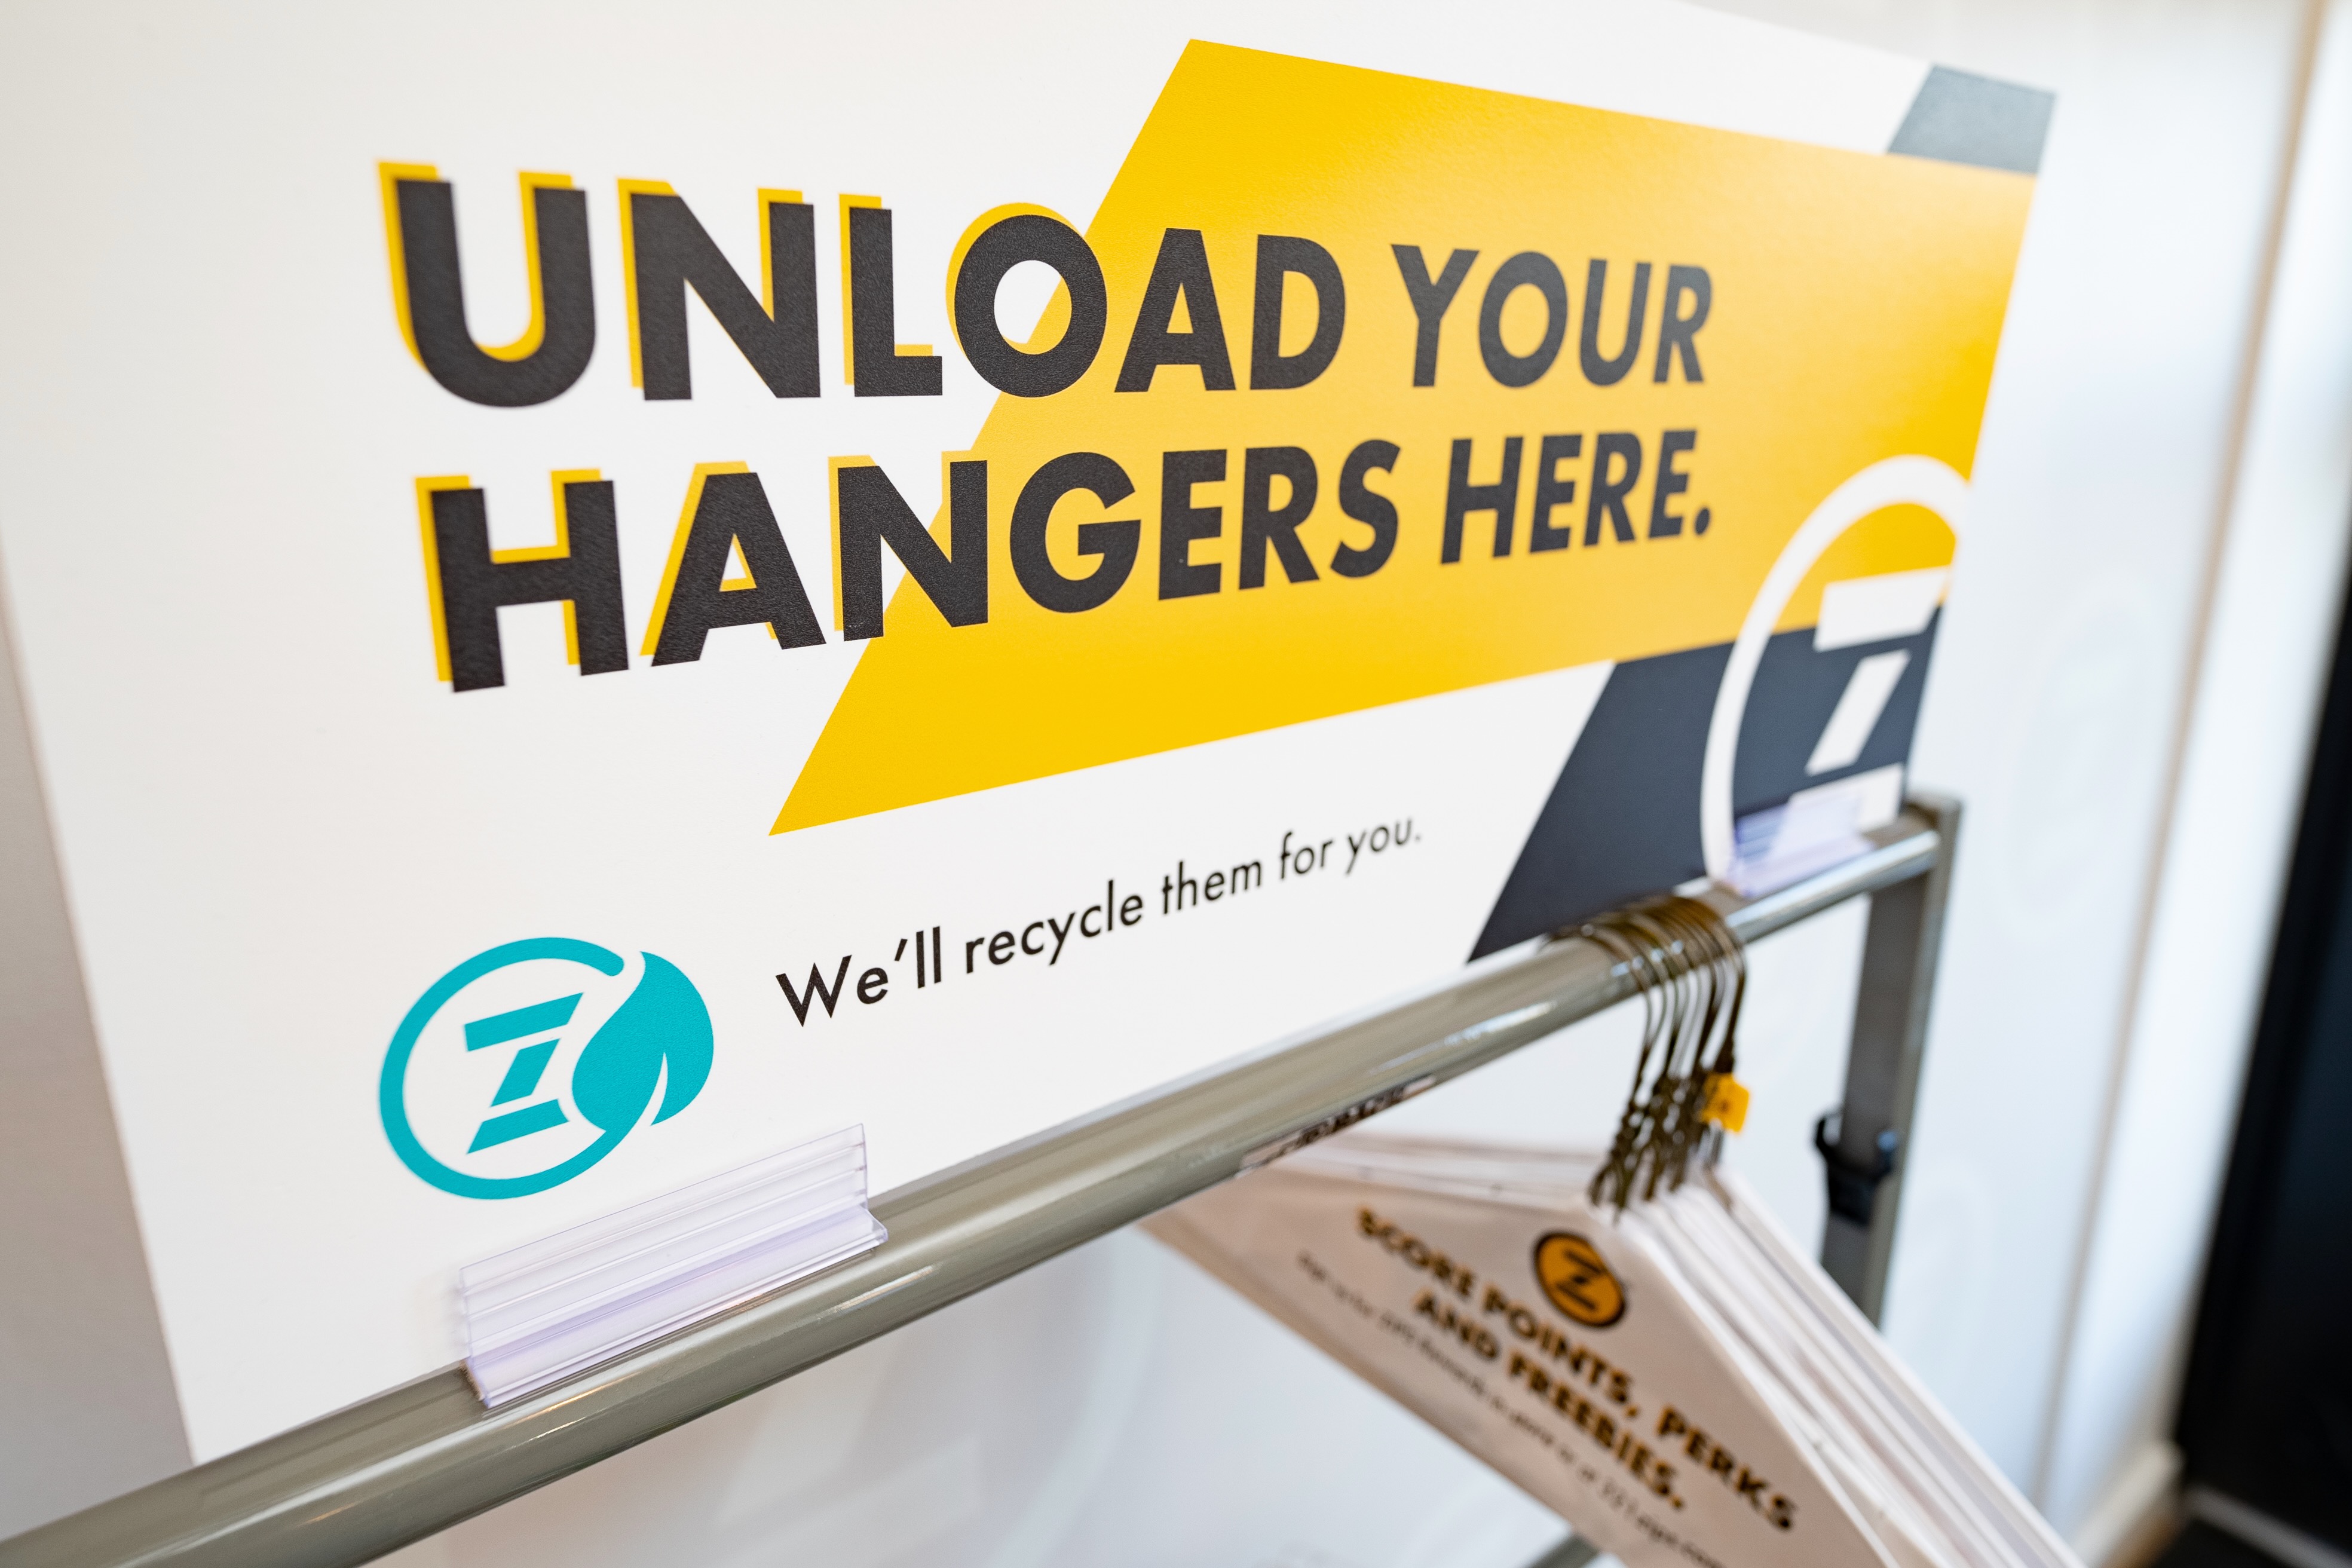 ZIPS Cleaners makes it easy to recycle your unwanted hangers. Just bring them in and hang them on ou ZIPS Cleaners Baltimore (410)216-5068